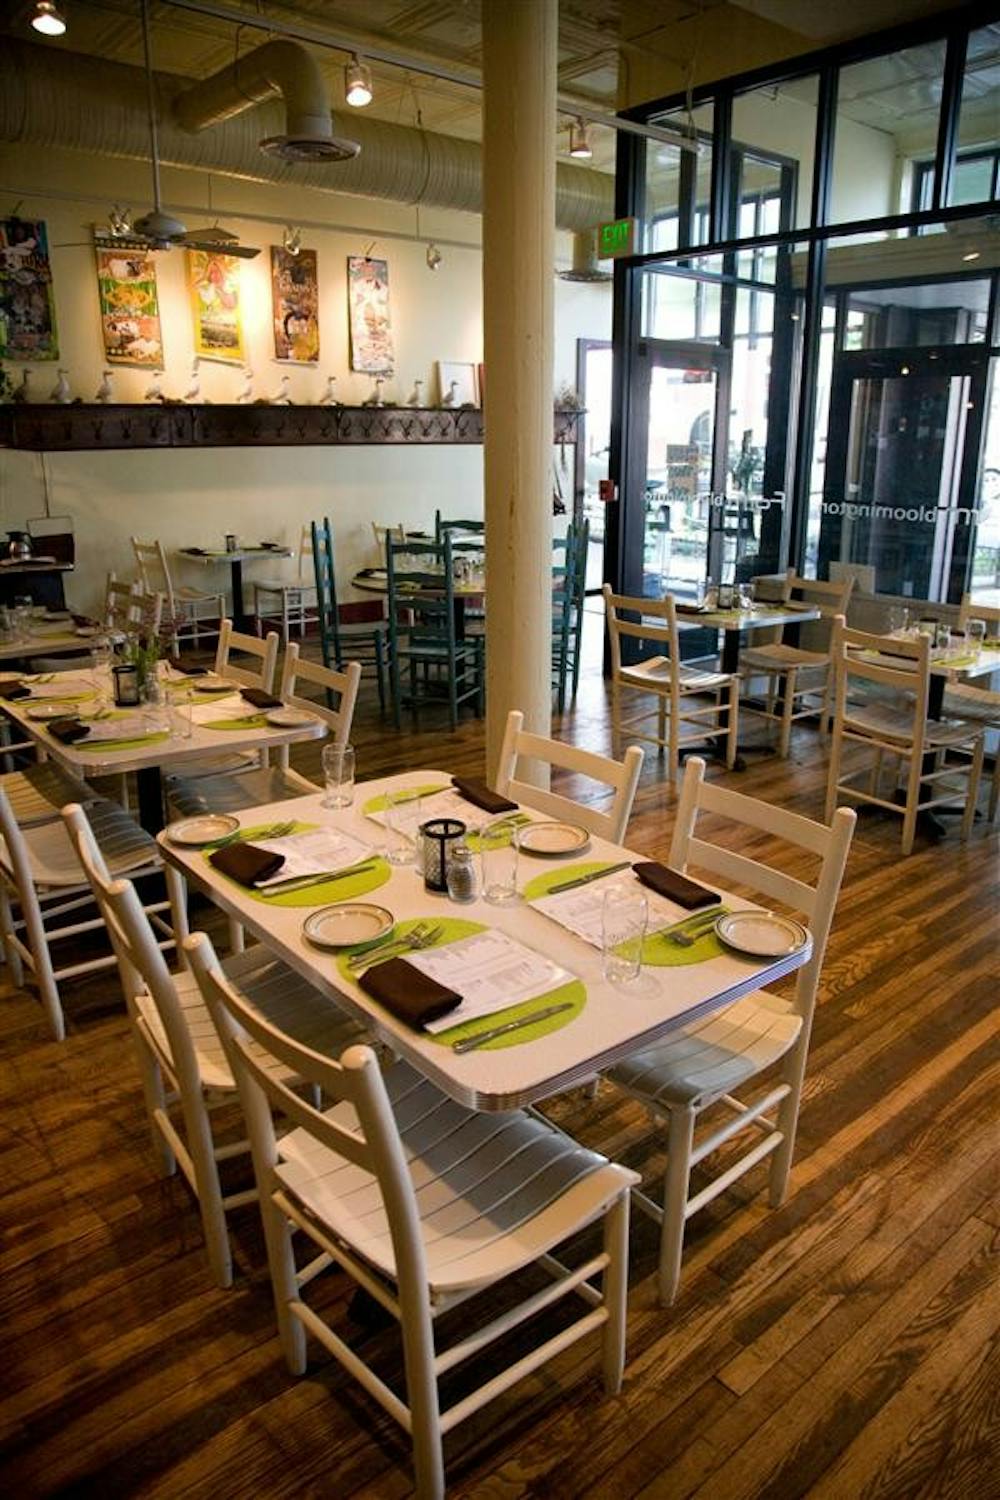 Farm Restaurant sits on Kirkwood Avenue in the heart of downtown Bloomington. The restaraunt prides itself on using local, seasonal ingredients.